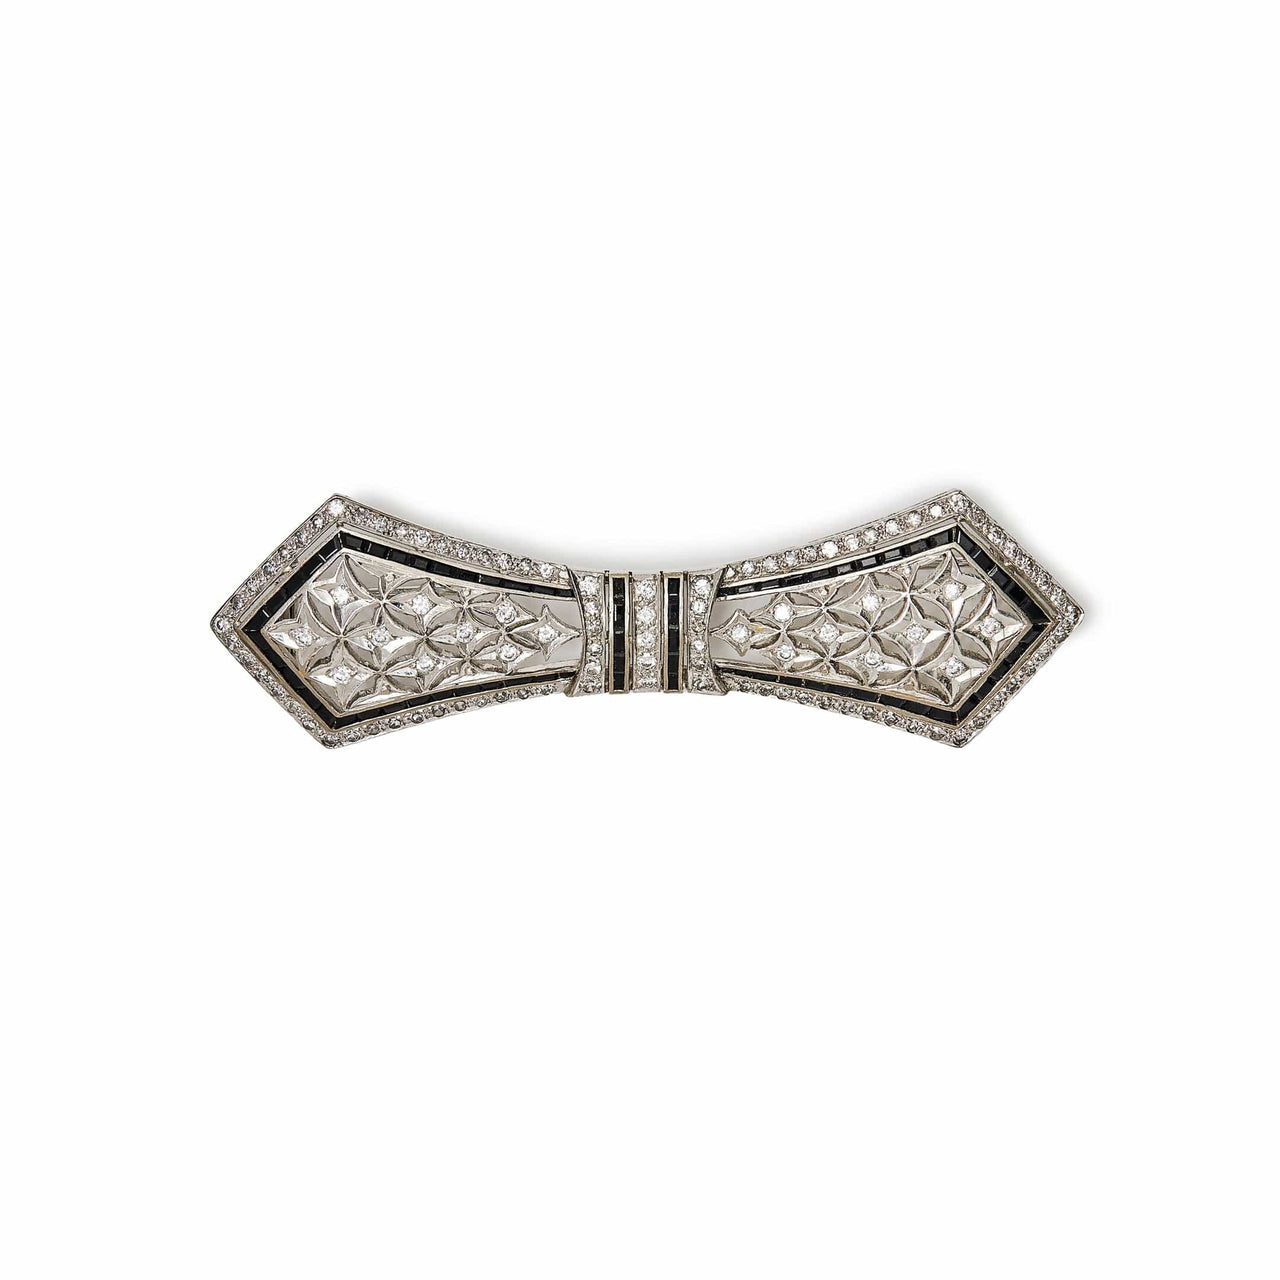 Antique White and Black Diamonds Brooch